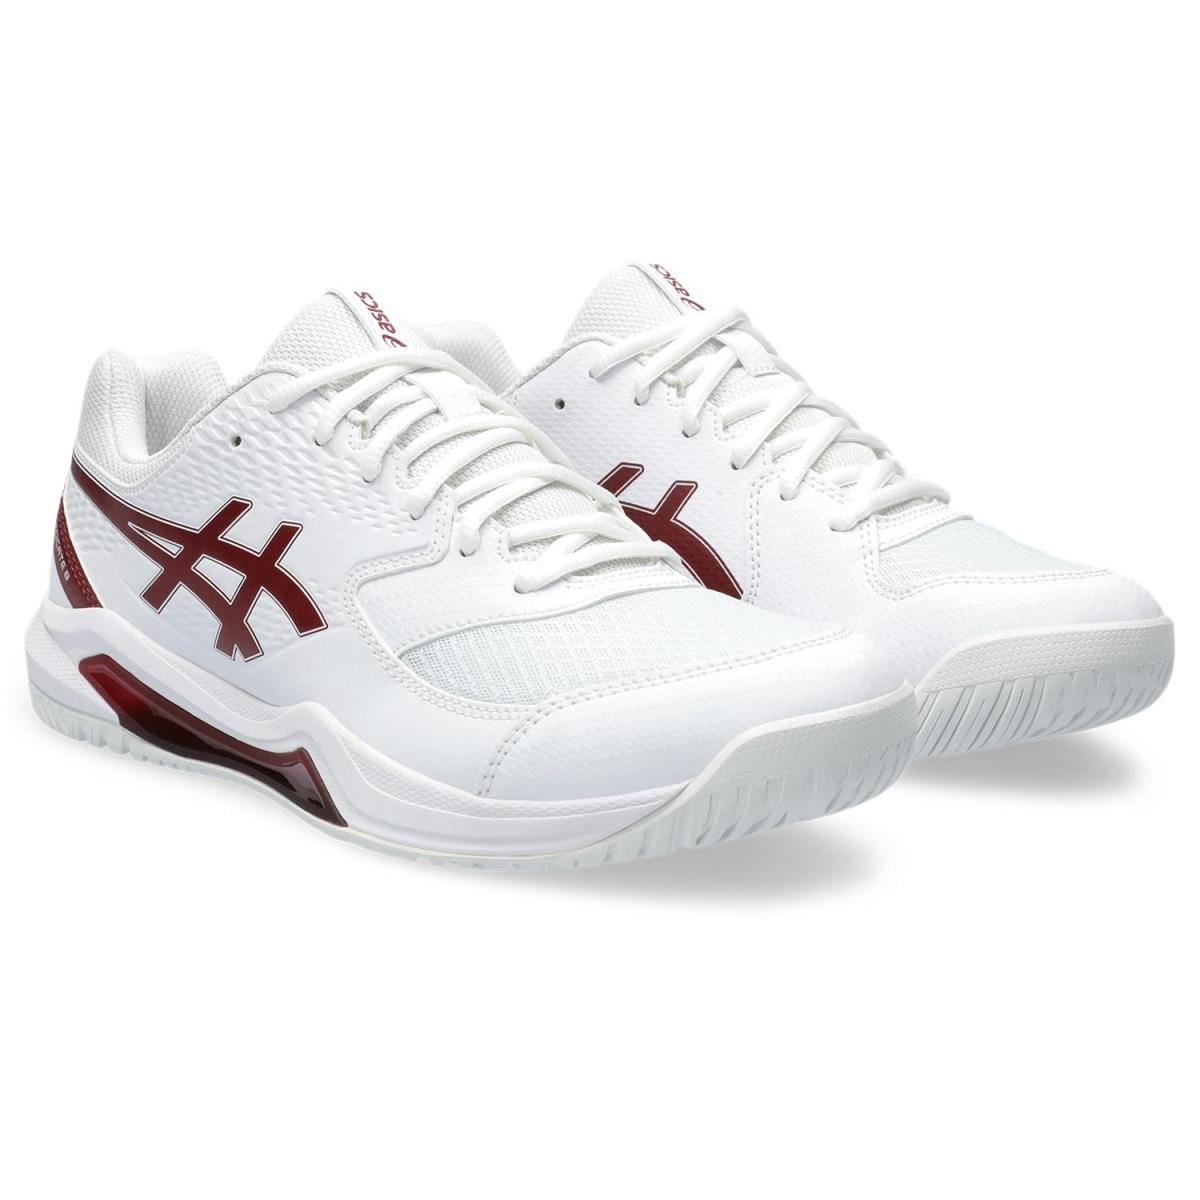 Man`s Sneakers Athletic Shoes Asics Gel-dedicate 8 Tennis Shoe White/Antique Red